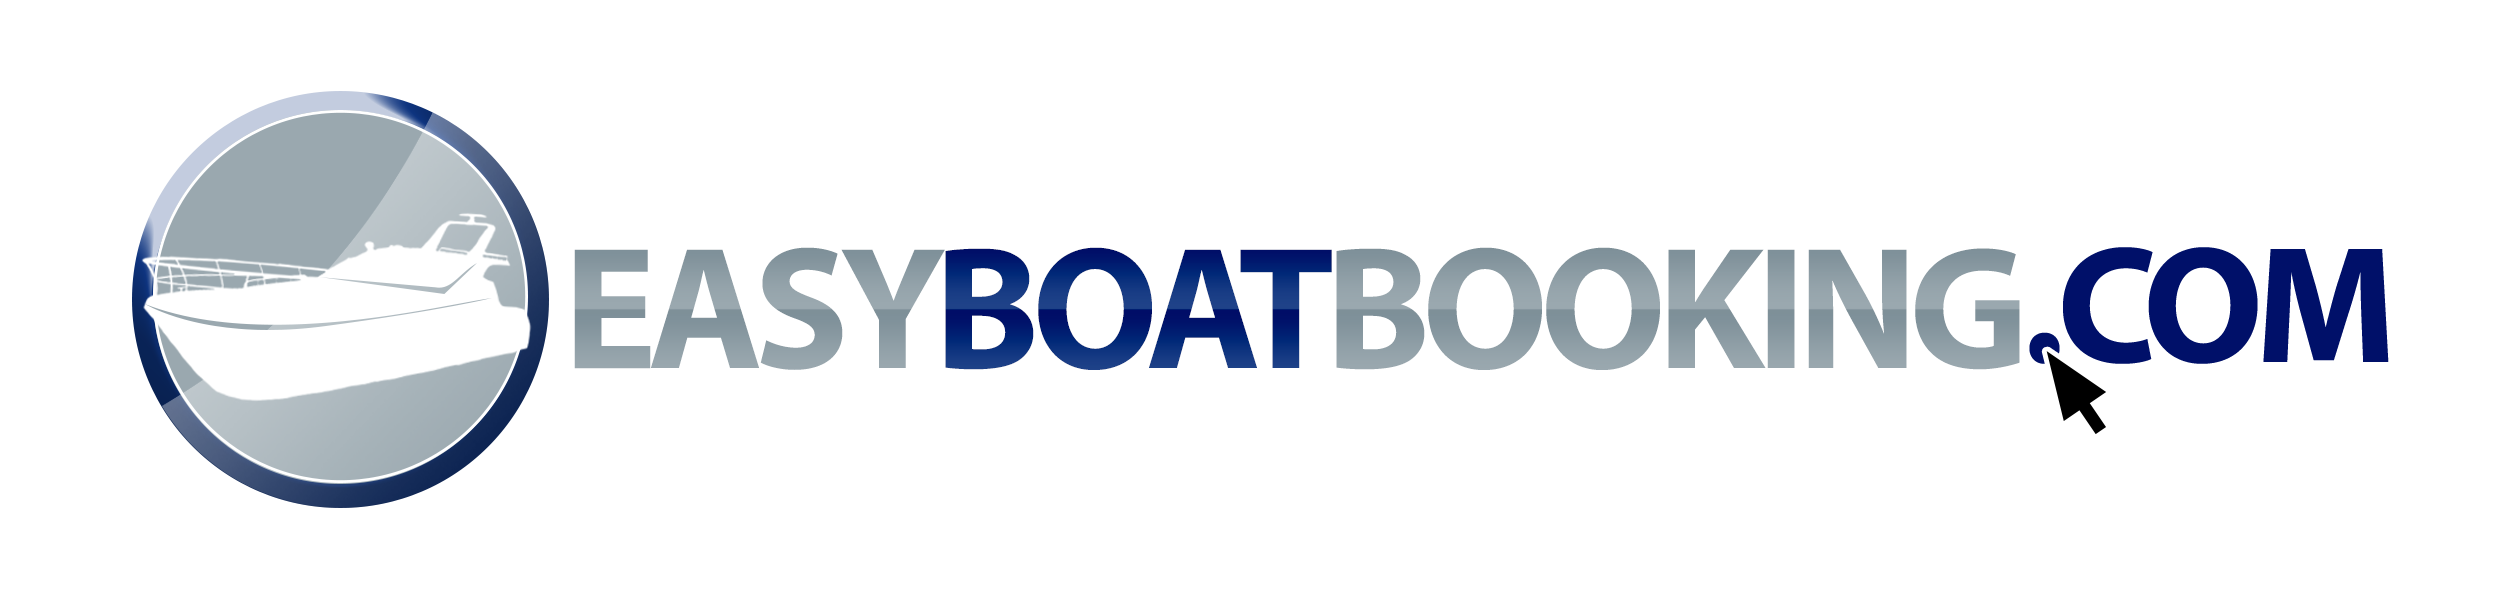 Easy Boat Booking